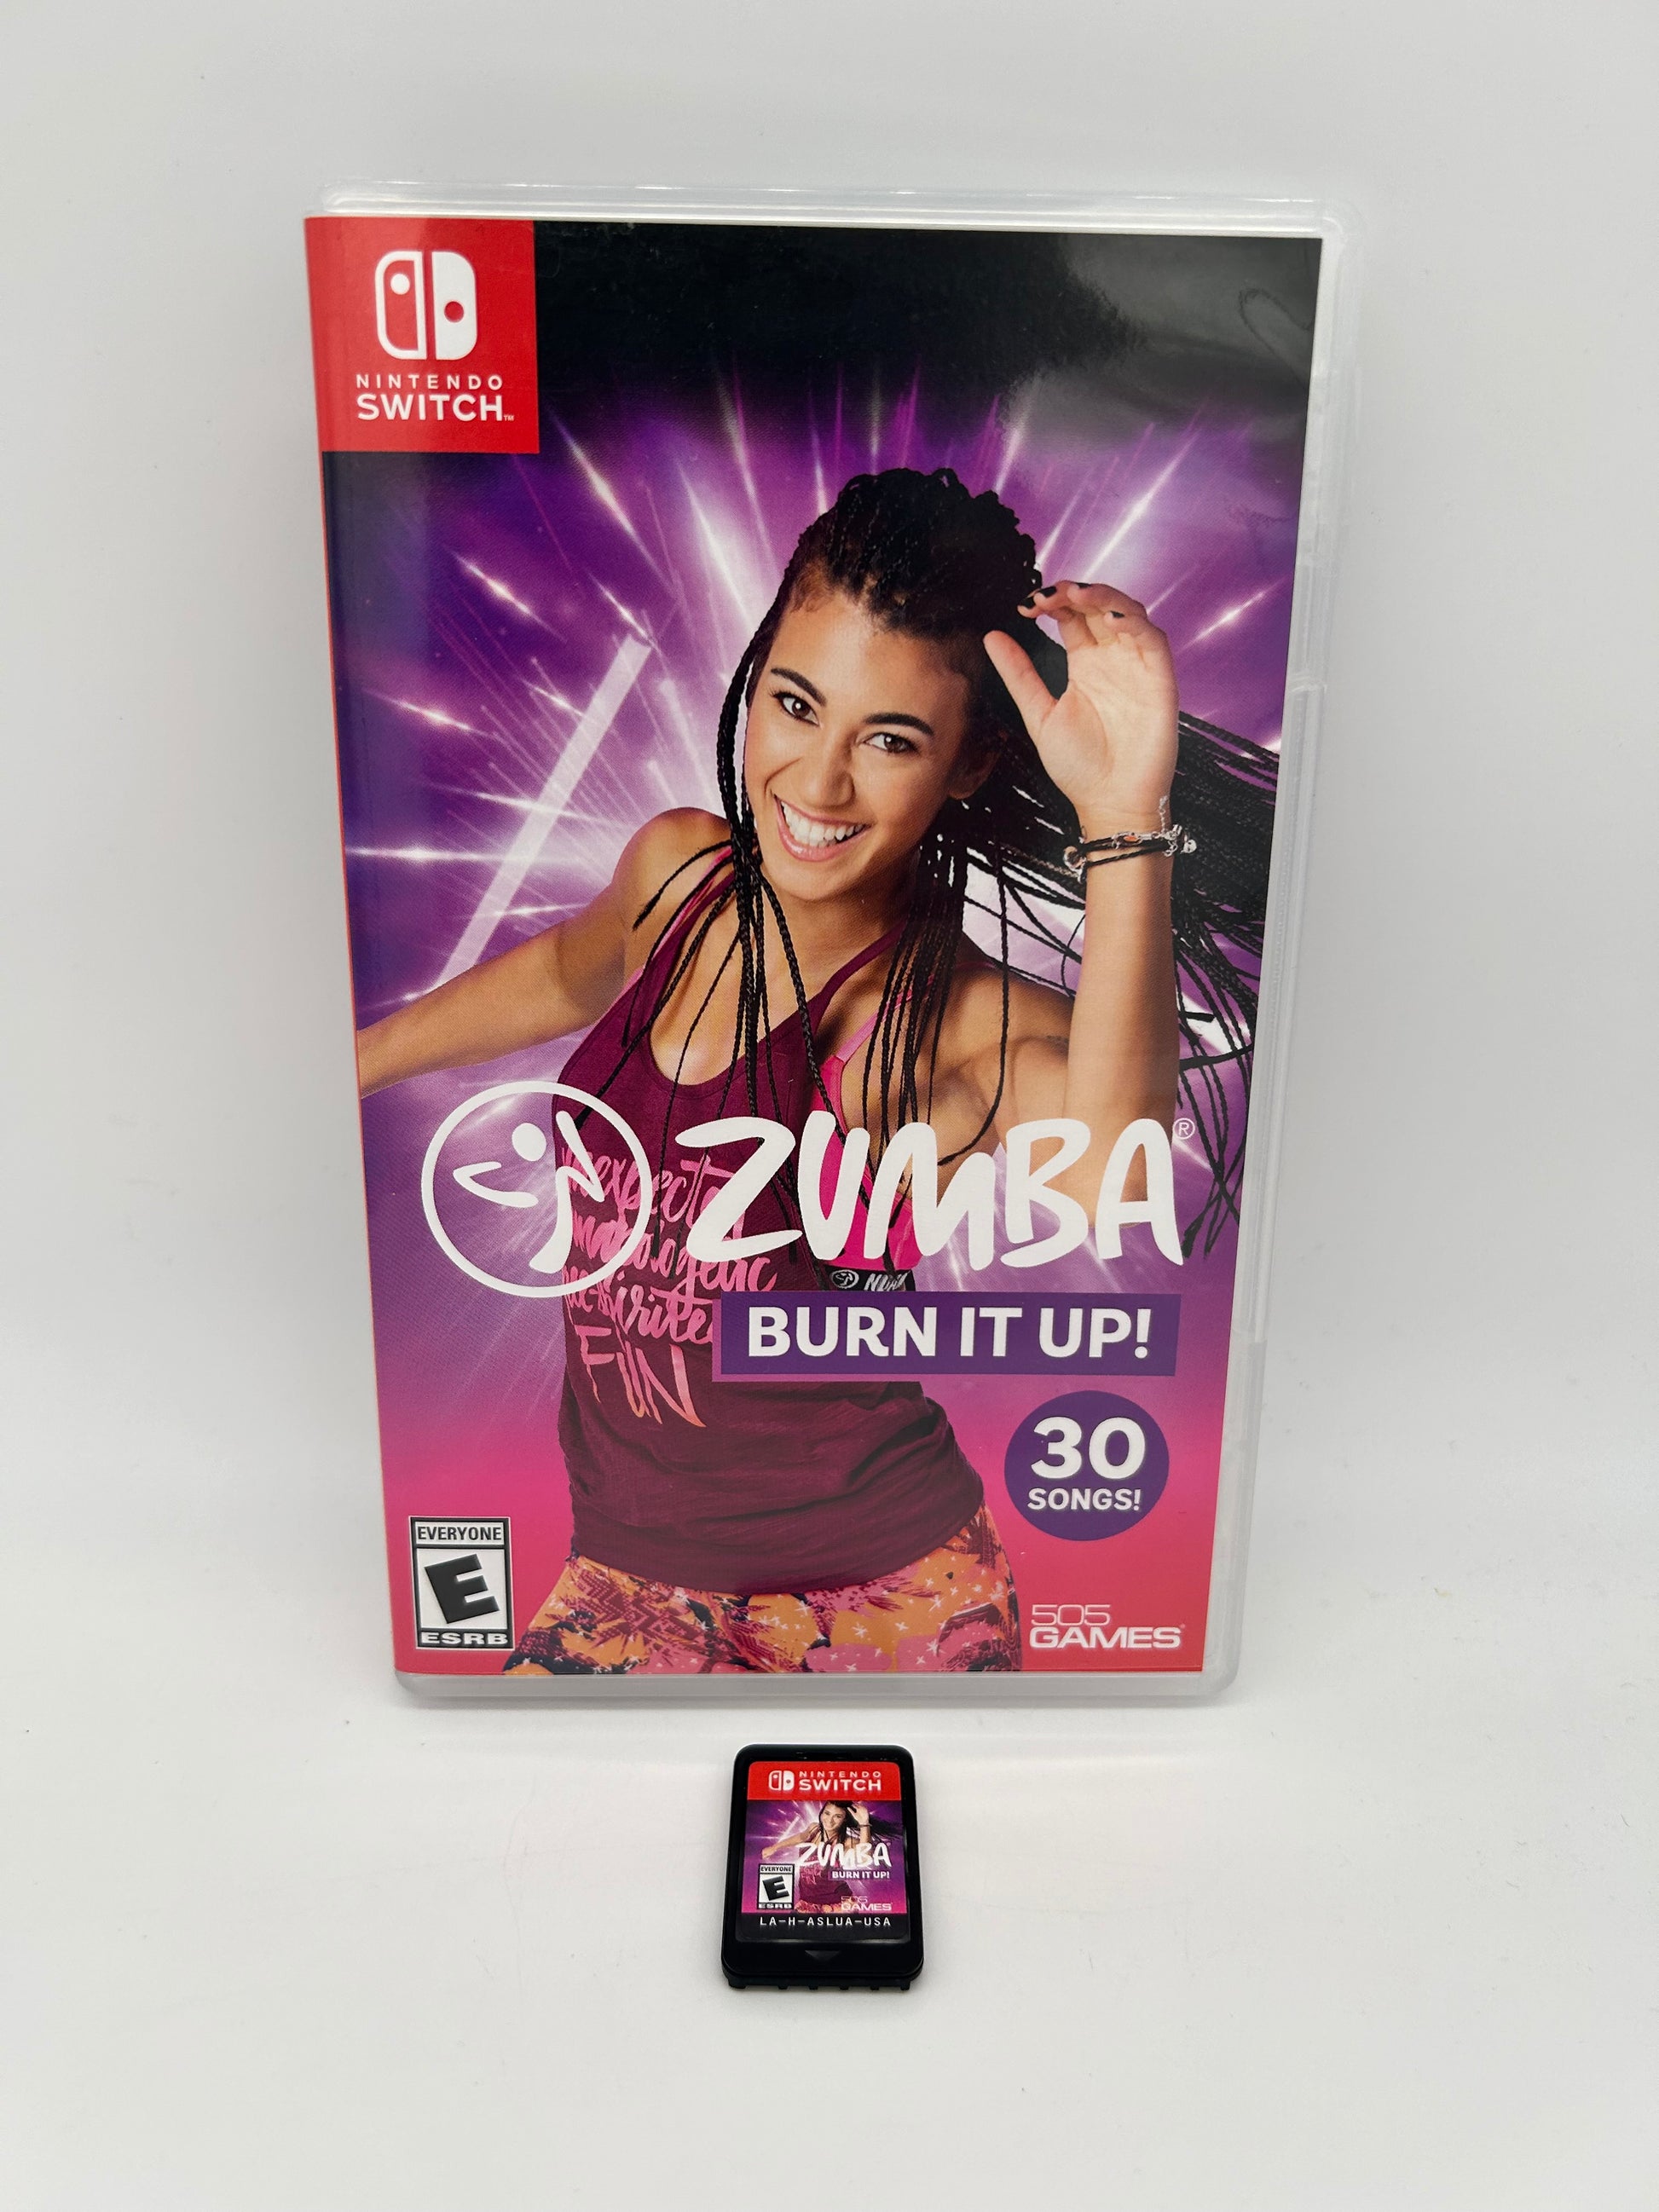 PiXEL-RETRO.COM : NINTENDO SWITCH COMPLETE IN BOX COMPLETE MANUAL GAME NTSC ZUMBA BURN IT UP